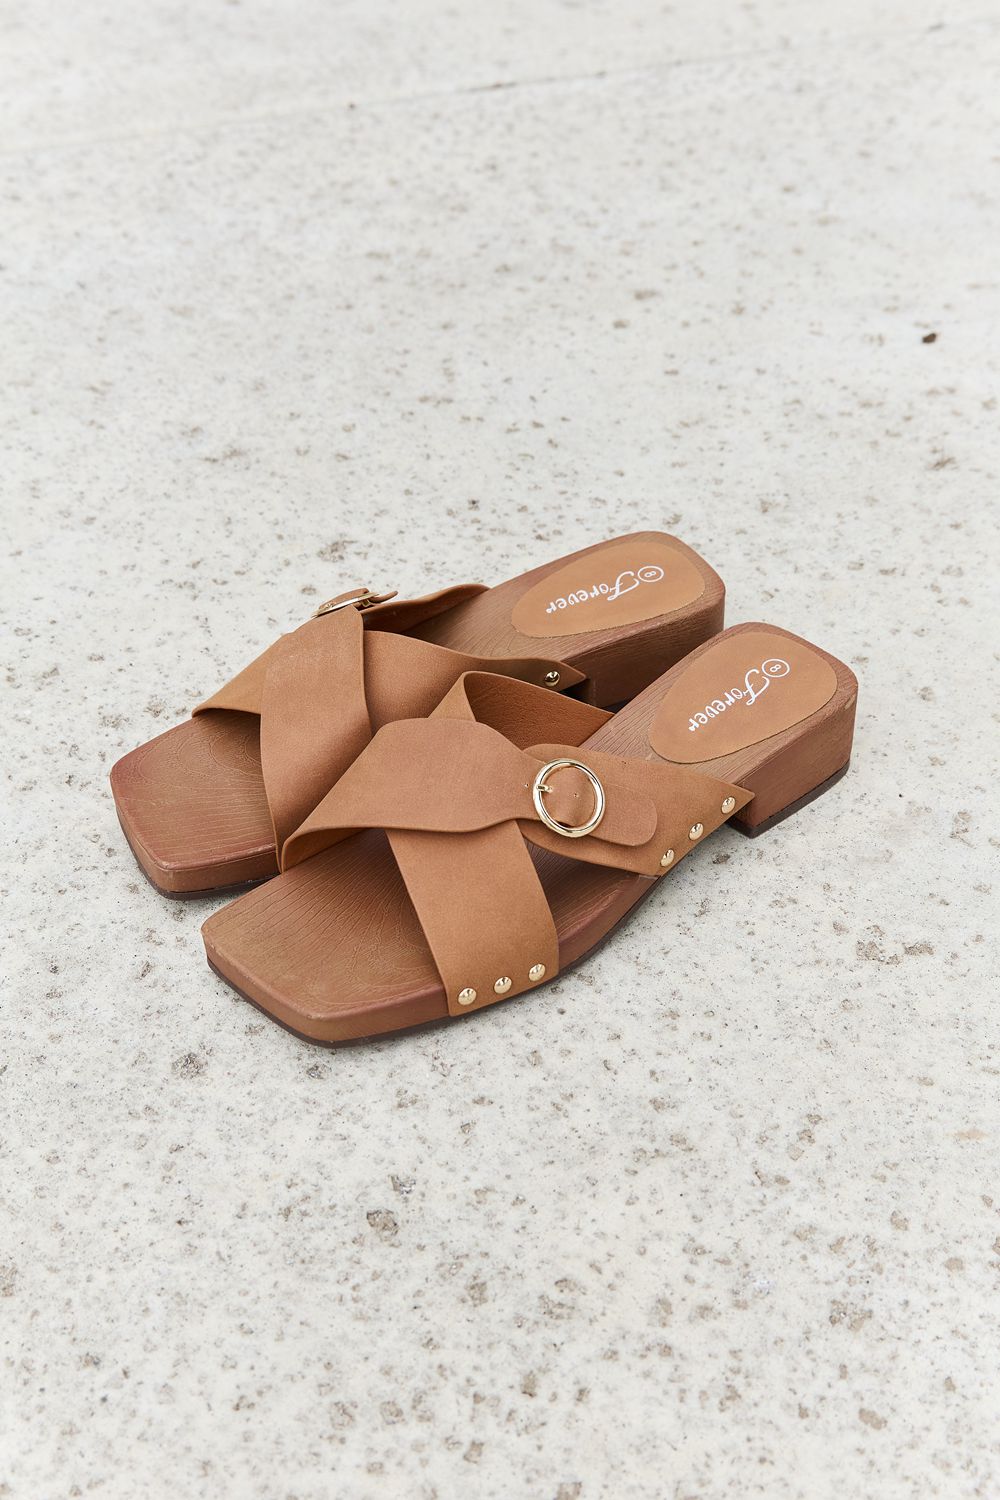 Forever Link Square Toe Cross Strap Buckle Clog Sandals in Ochre - AllIn Computer